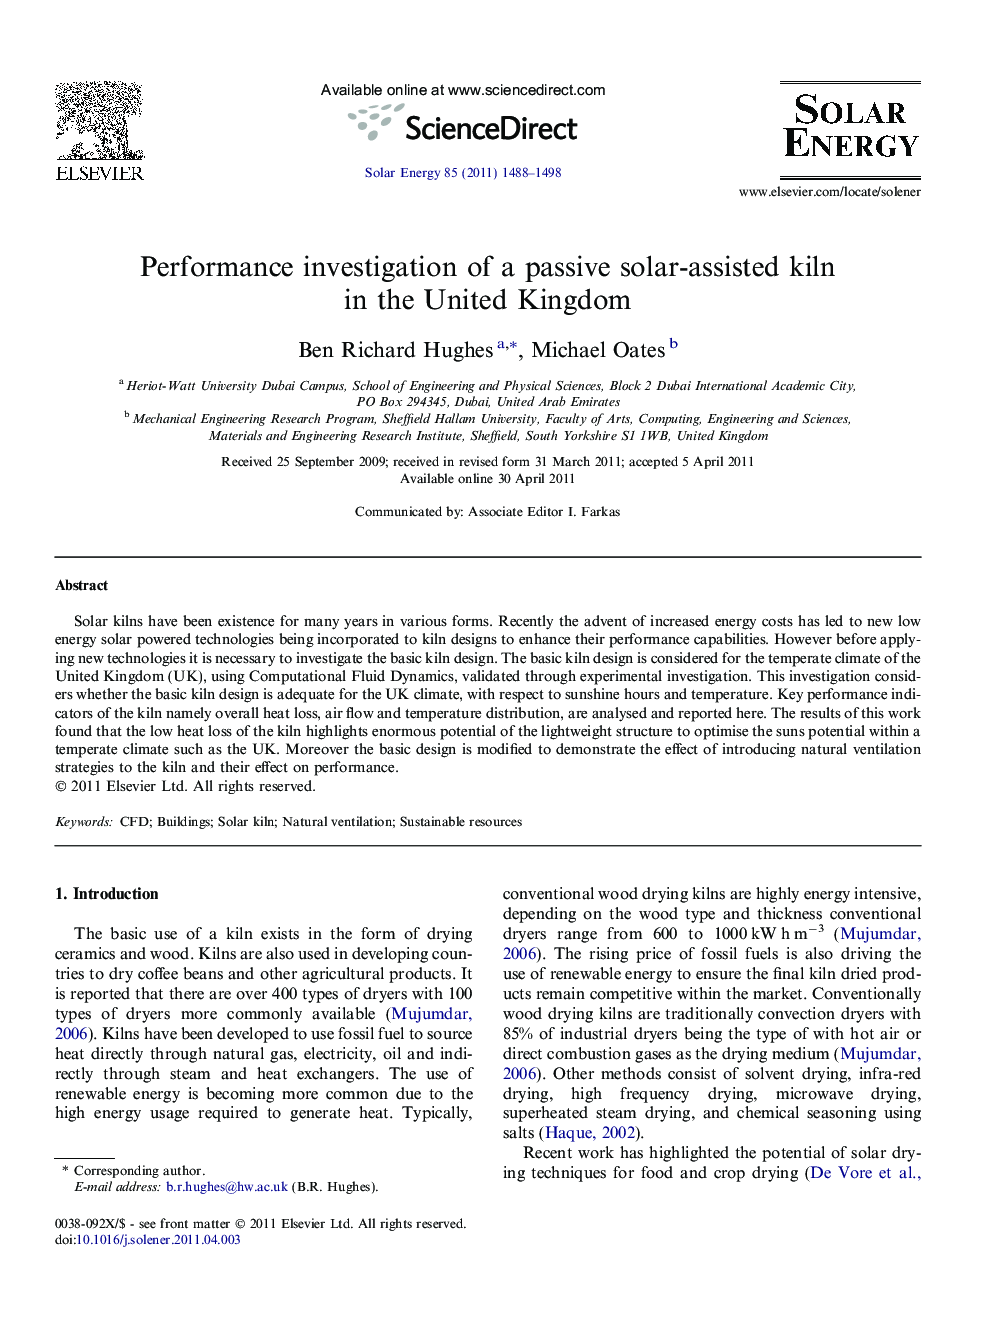 Performance investigation of a passive solar-assisted kiln in the United Kingdom